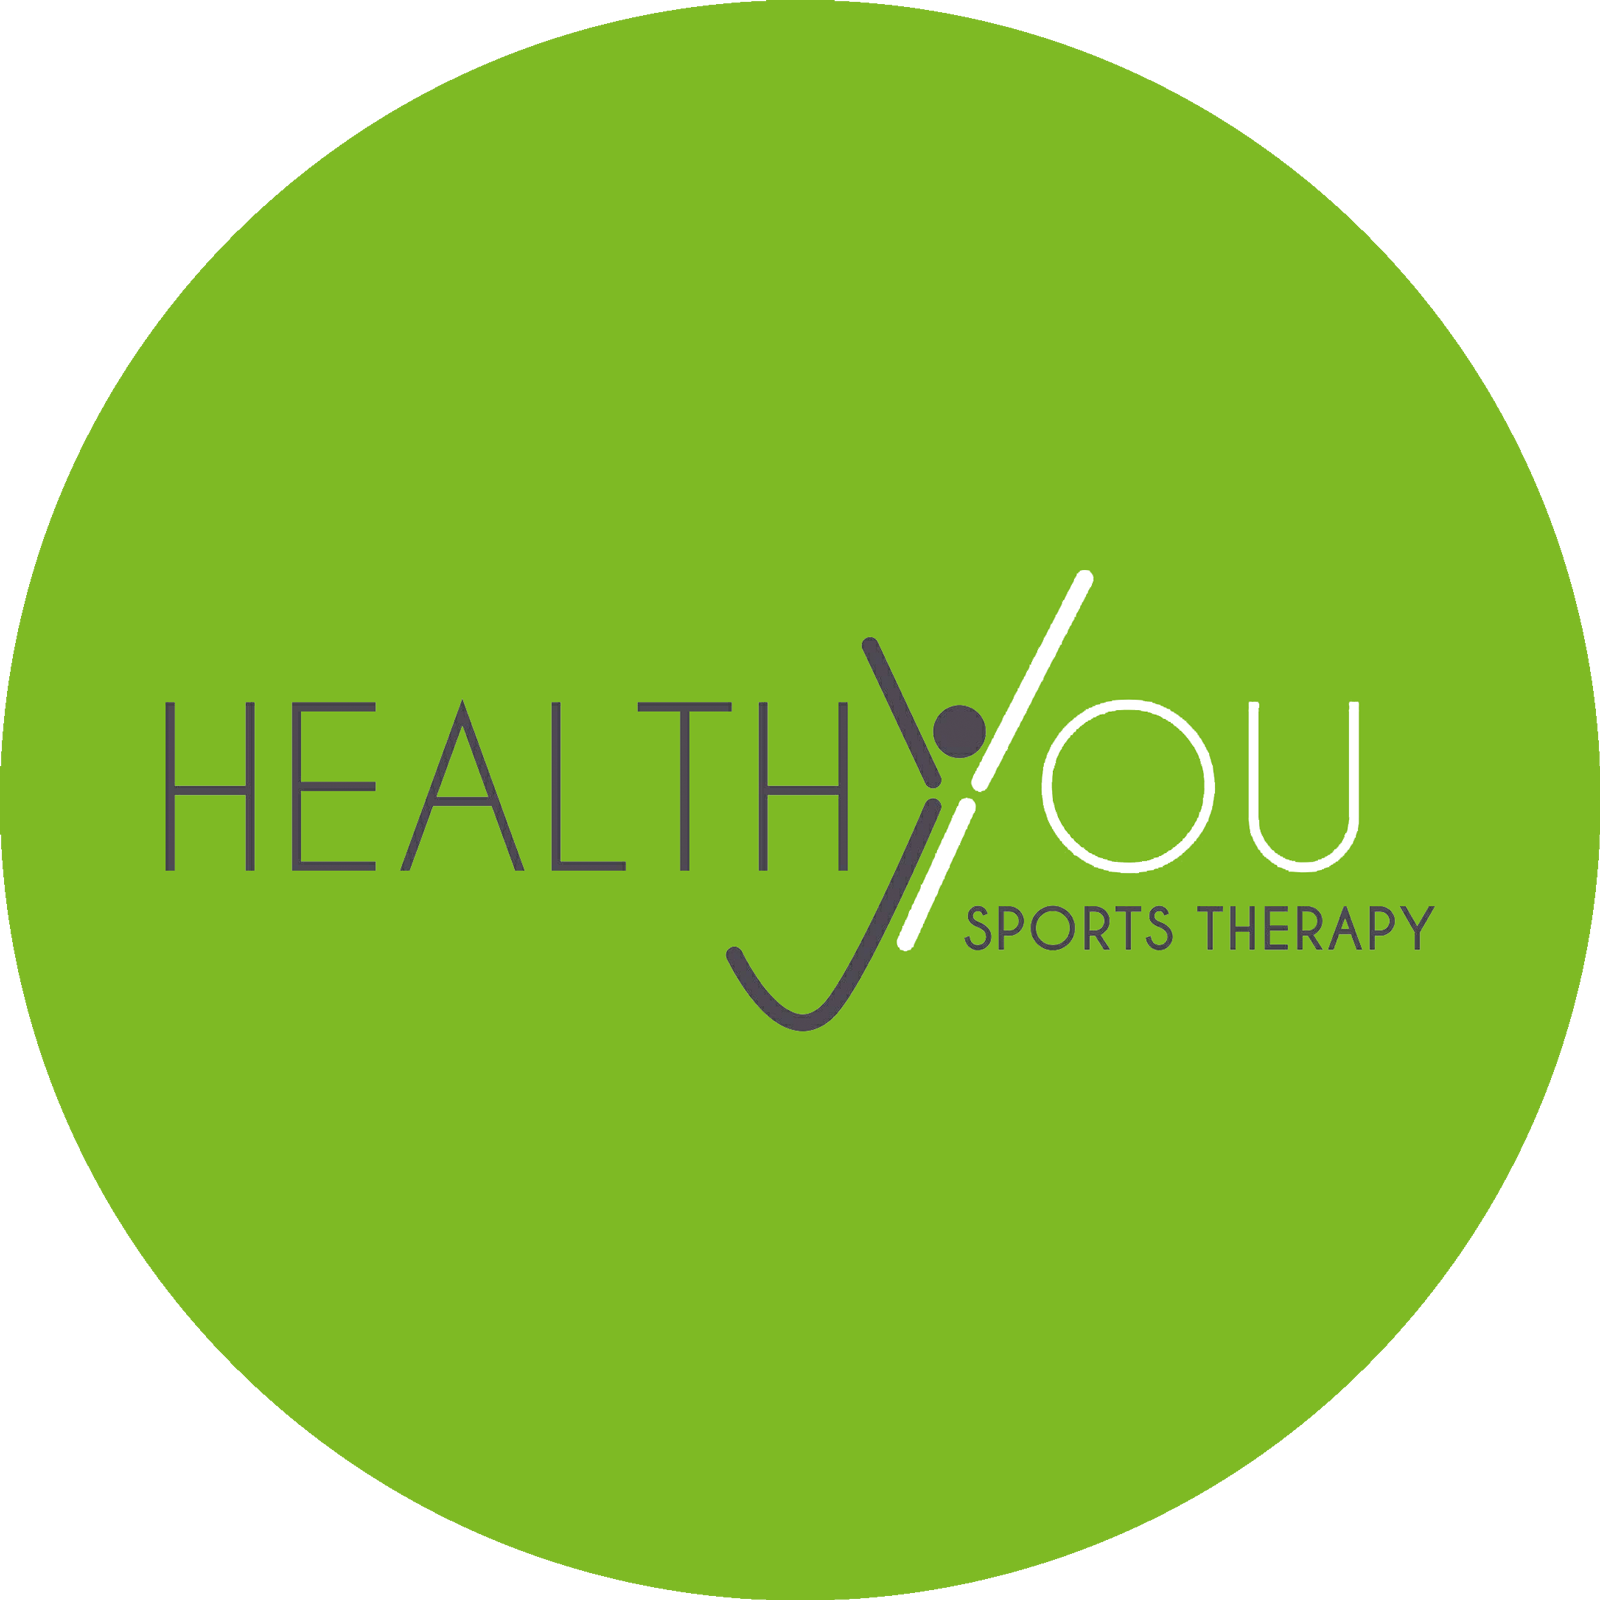 Healthy You Sports Therapy